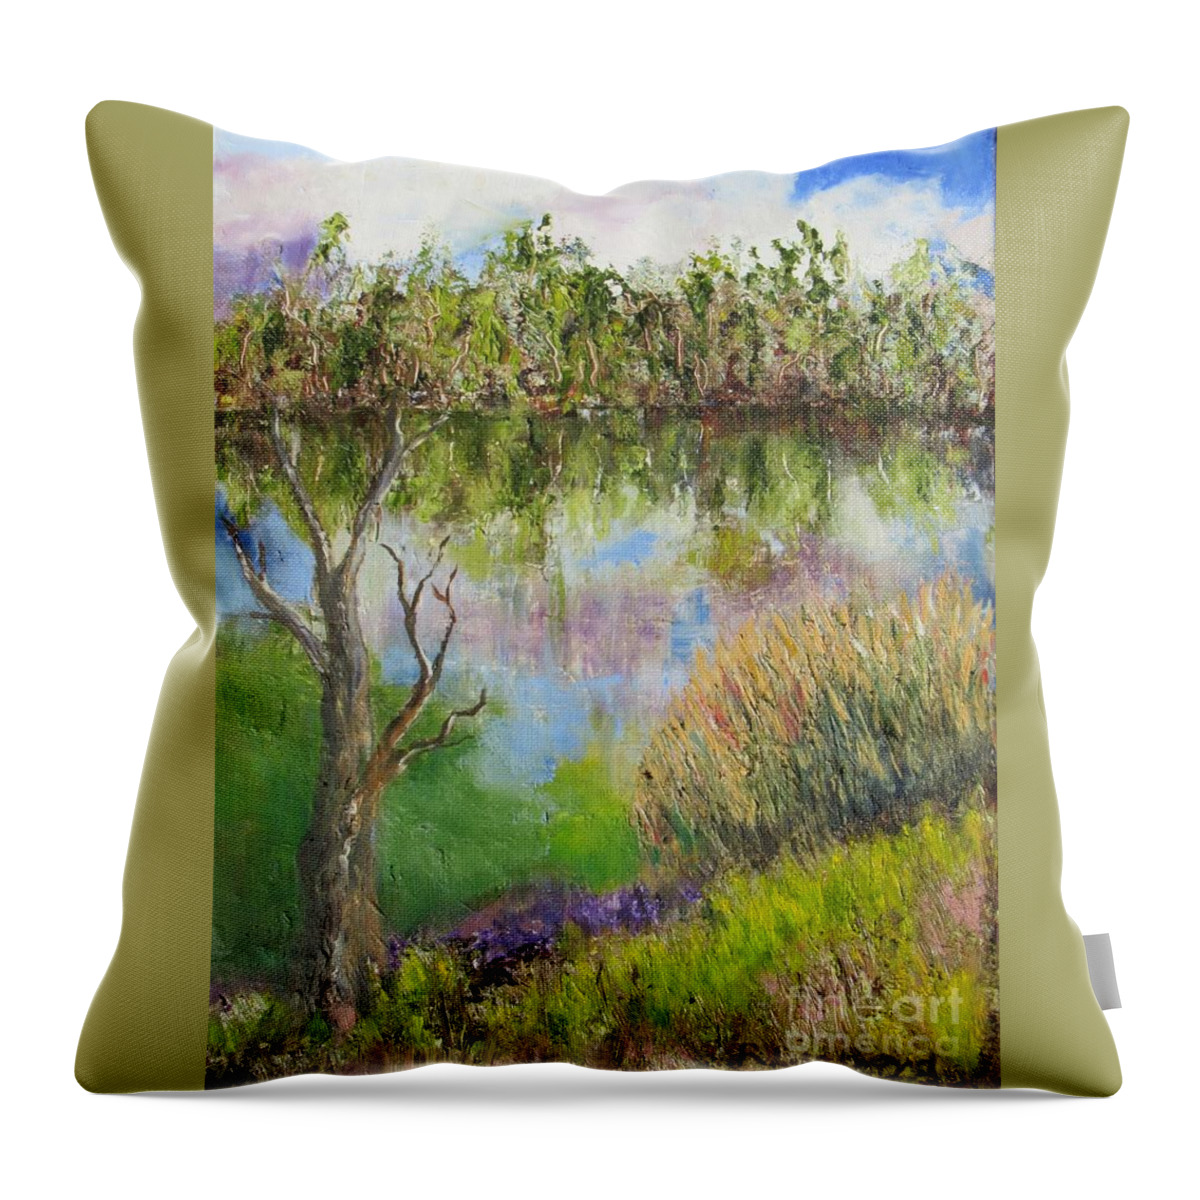 Lake Throw Pillow featuring the painting Moments By The Lake by Lisa Boyd